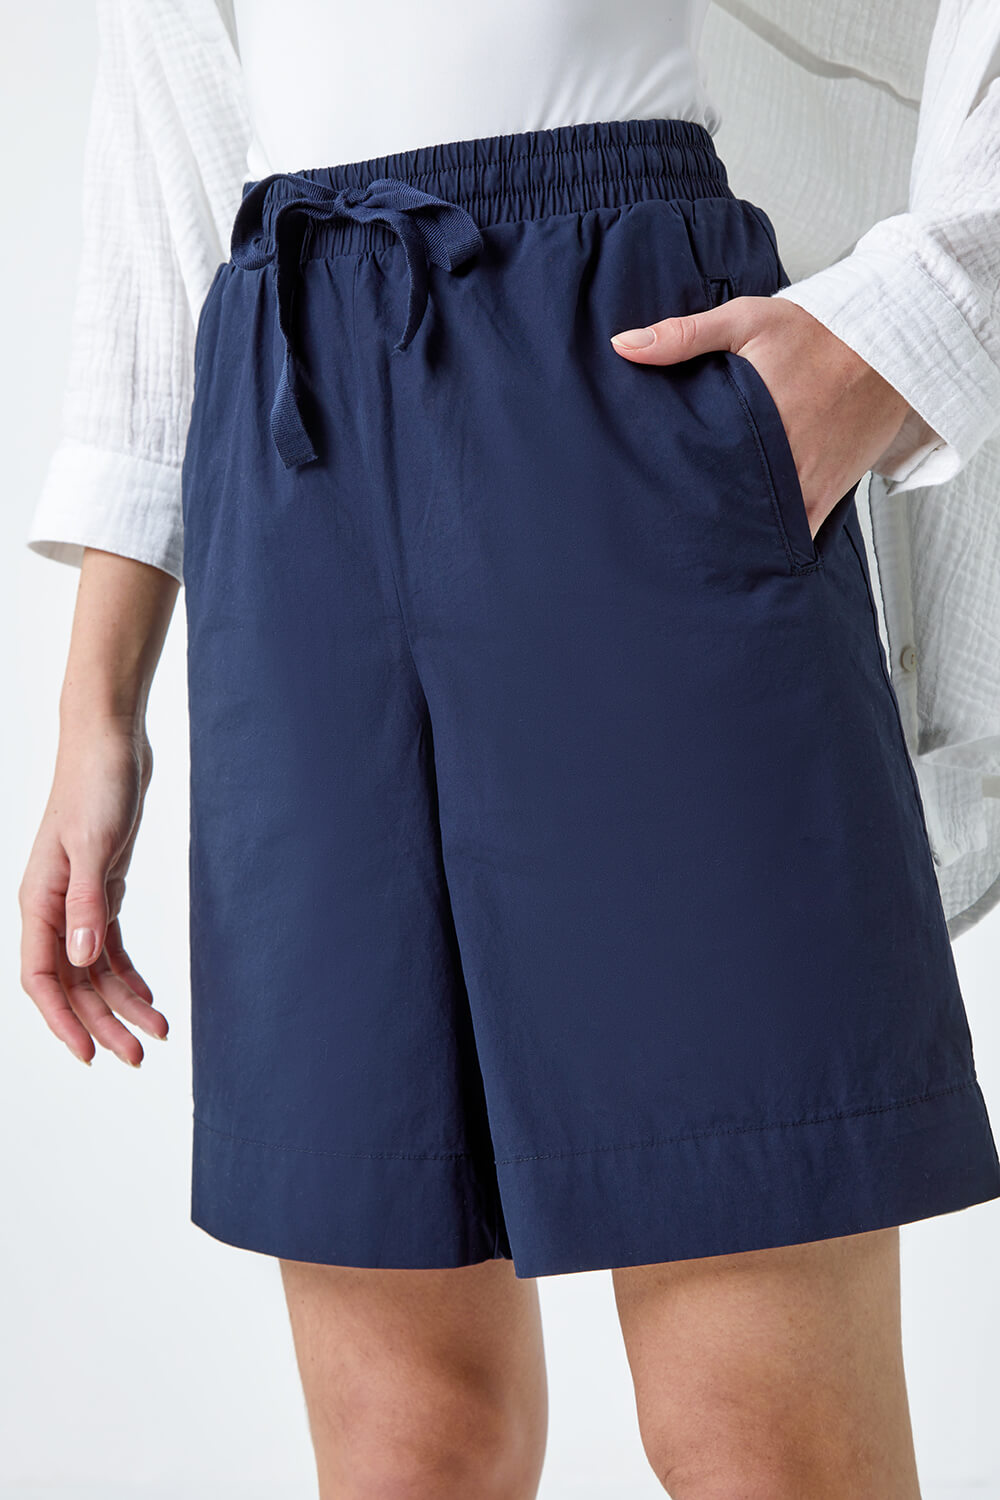 Navy  Cotton Tie Detail Pocket Shorts, Image 5 of 5